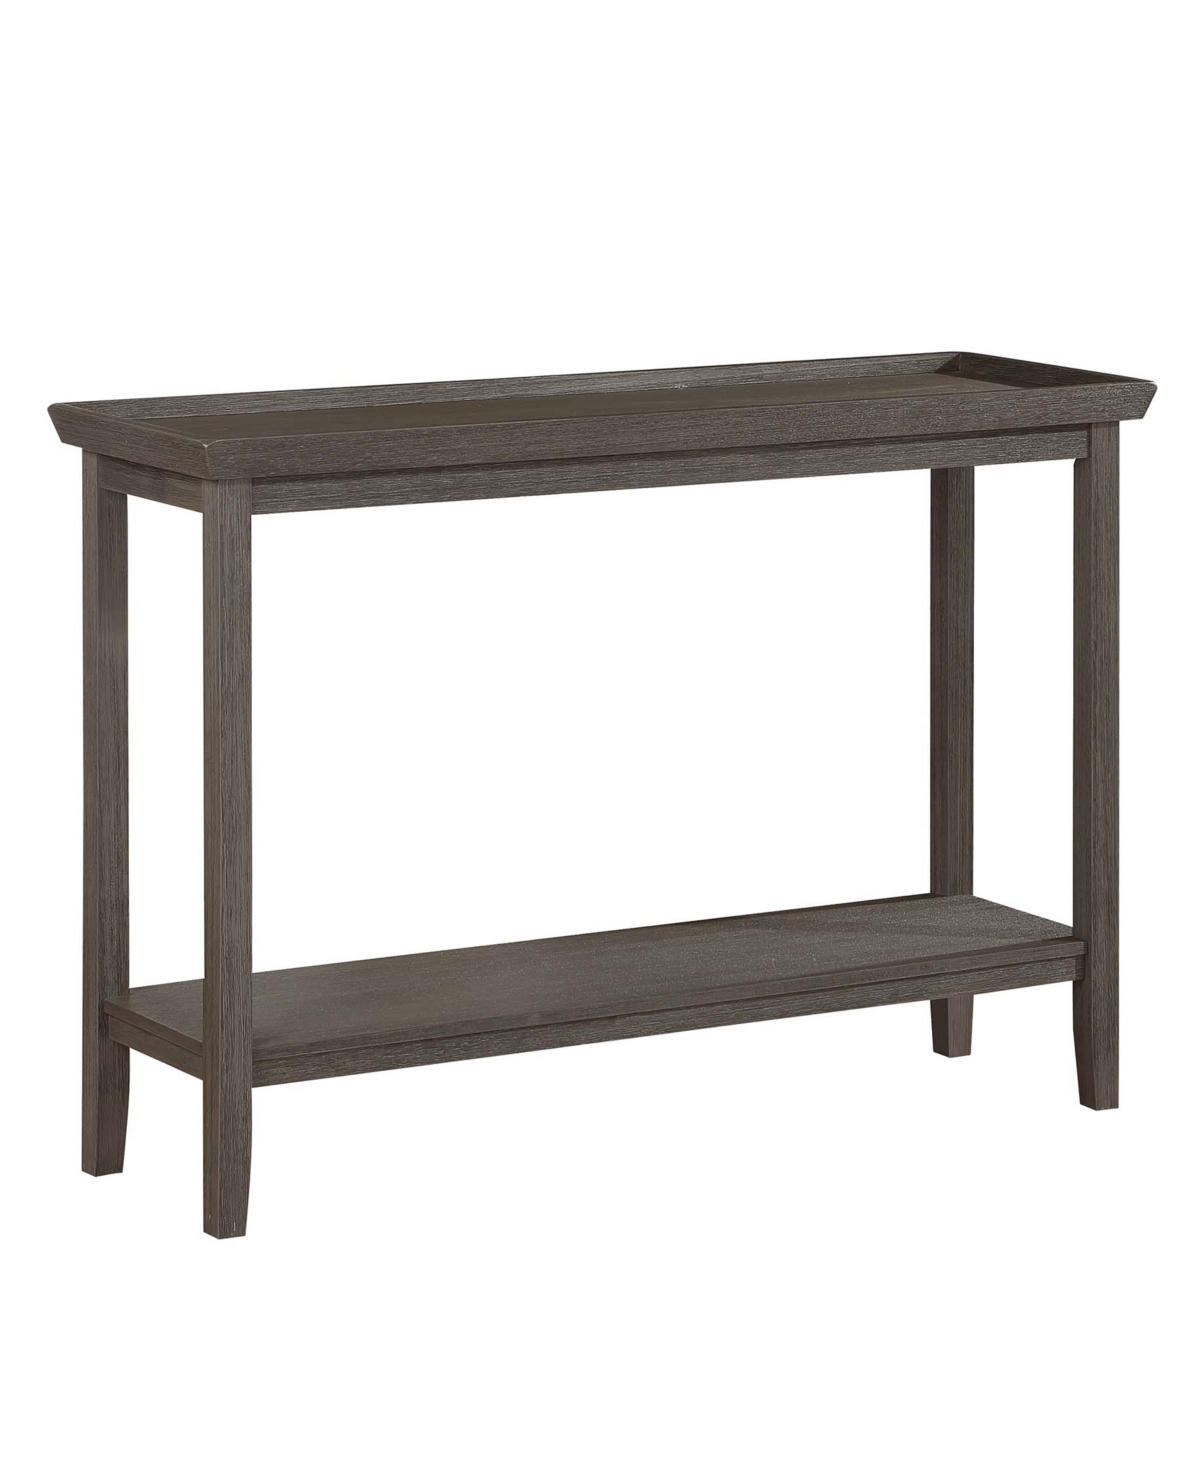 Convenience Concepts 48" Wood Ledgewood Console Table With Shelf In Wirebrush Dark Gray